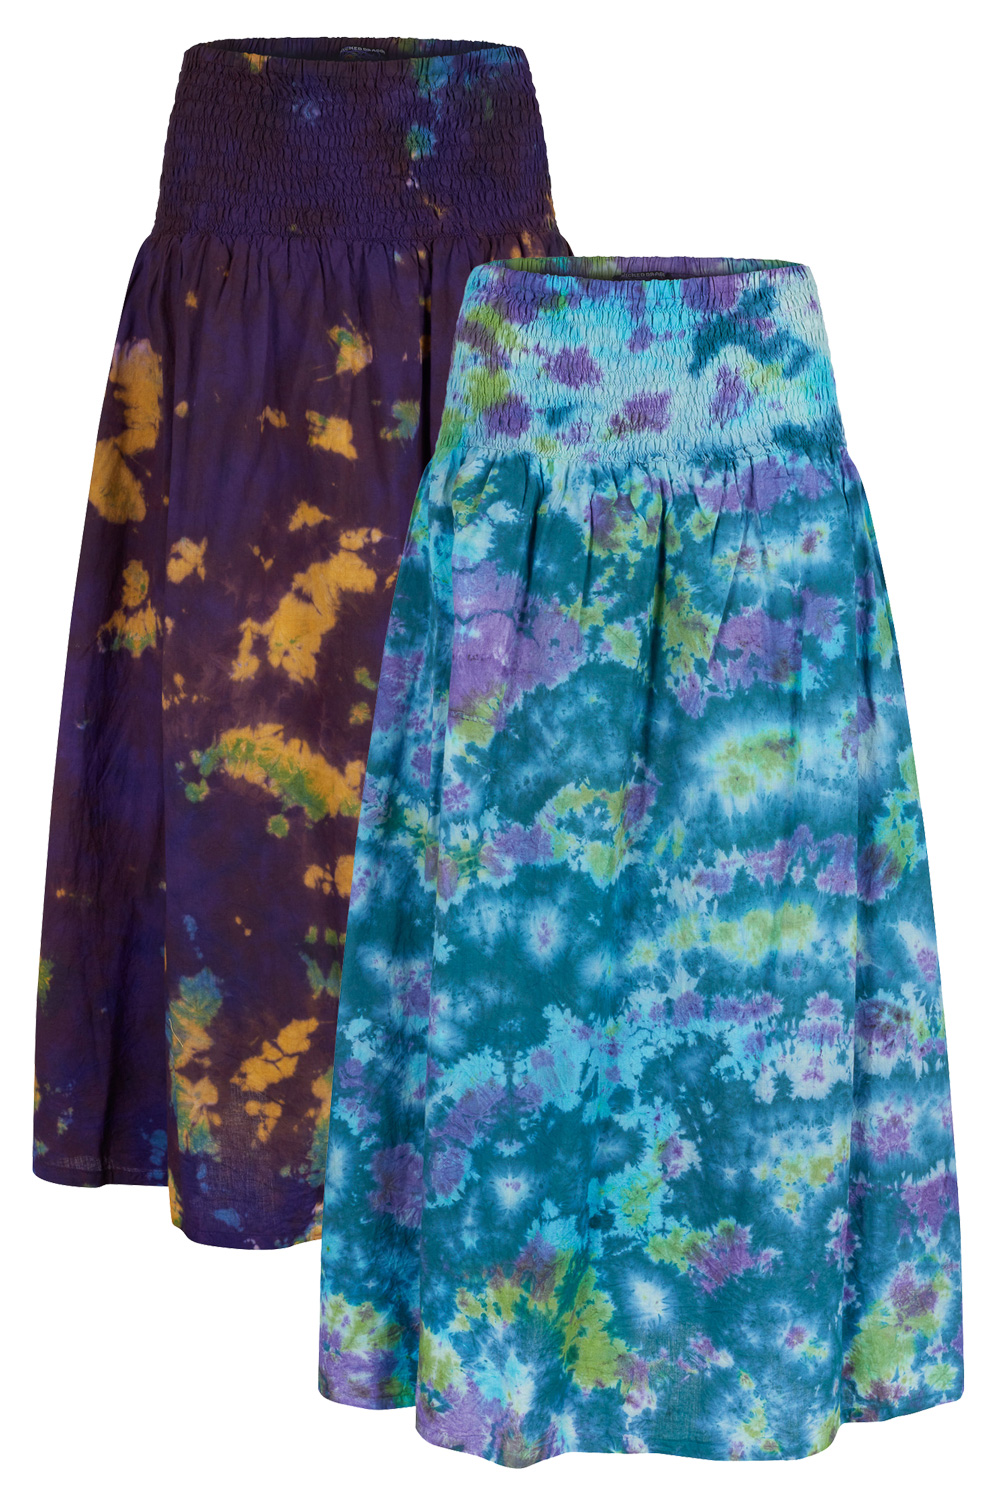 Funky marble tie dye skirt with pockets